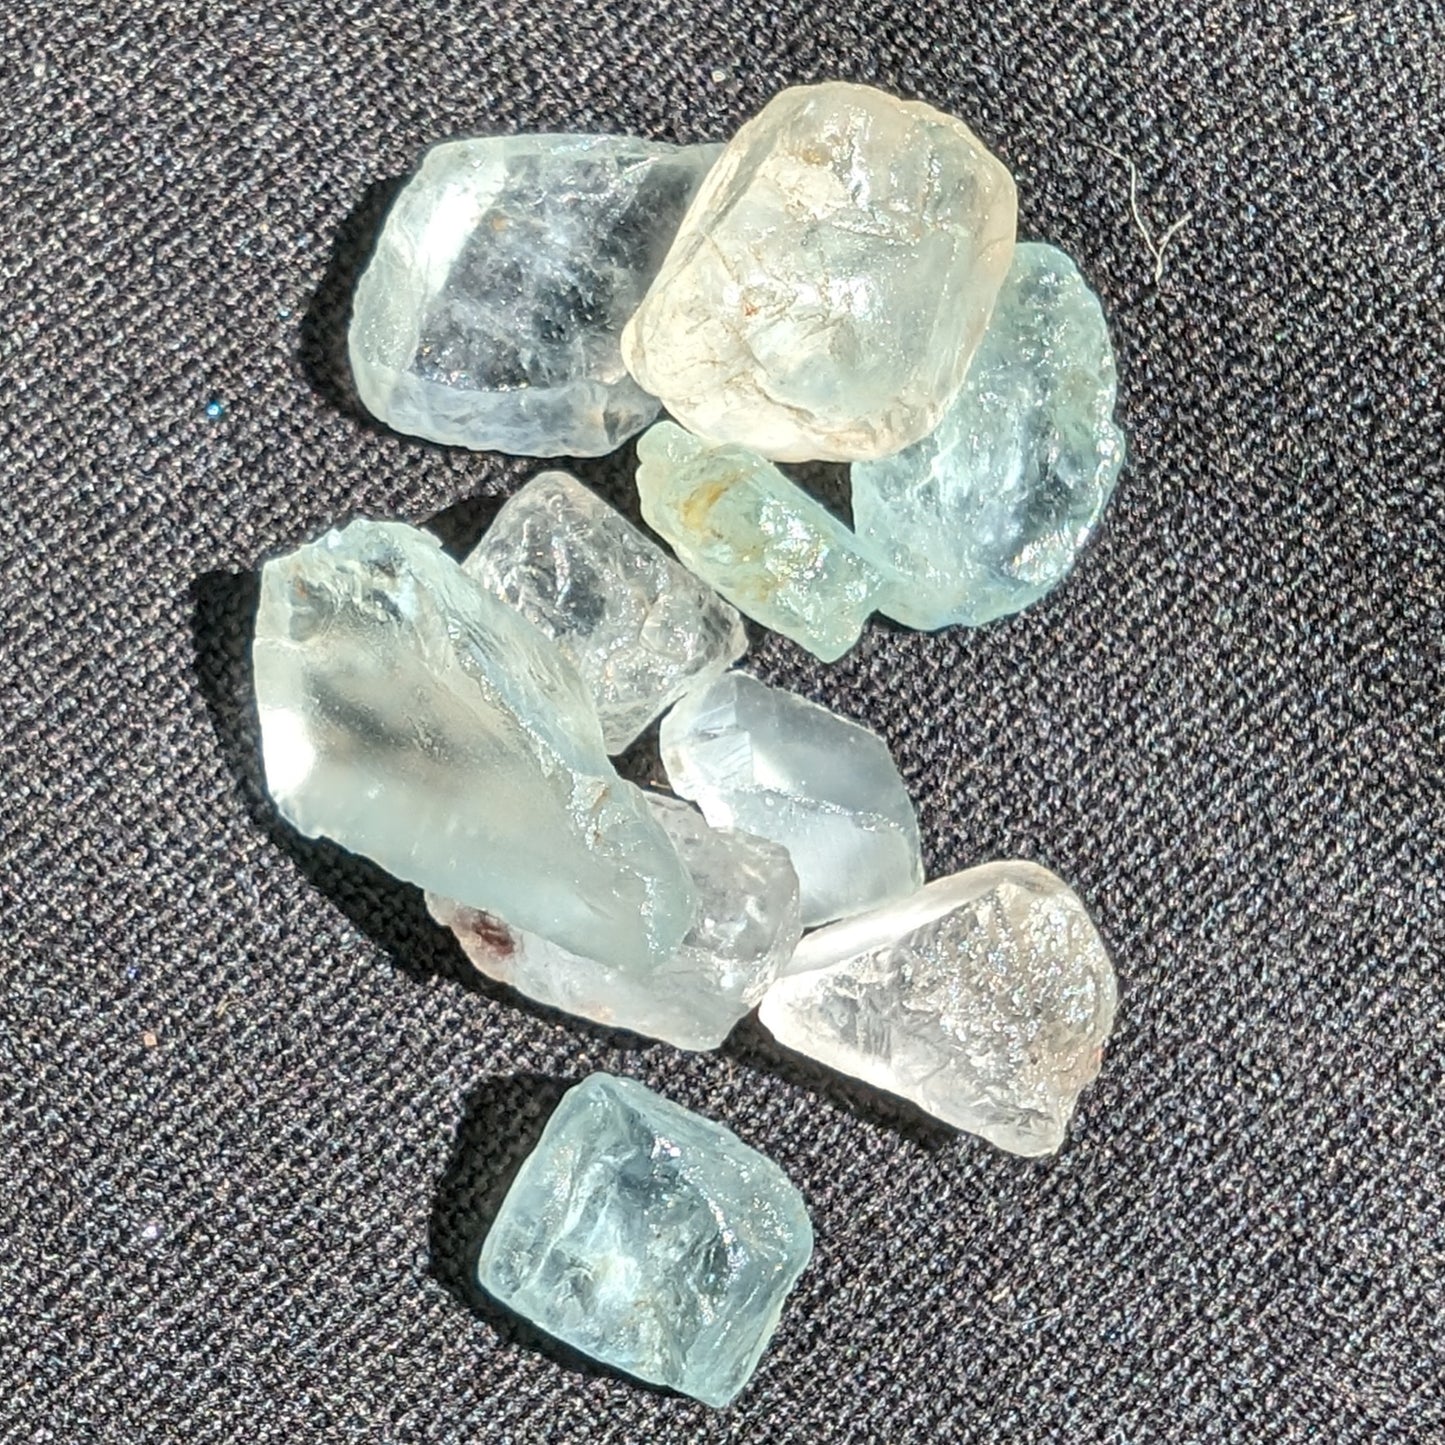 Blue Imperial Topaz 6-10 crystals from Brazil 8g